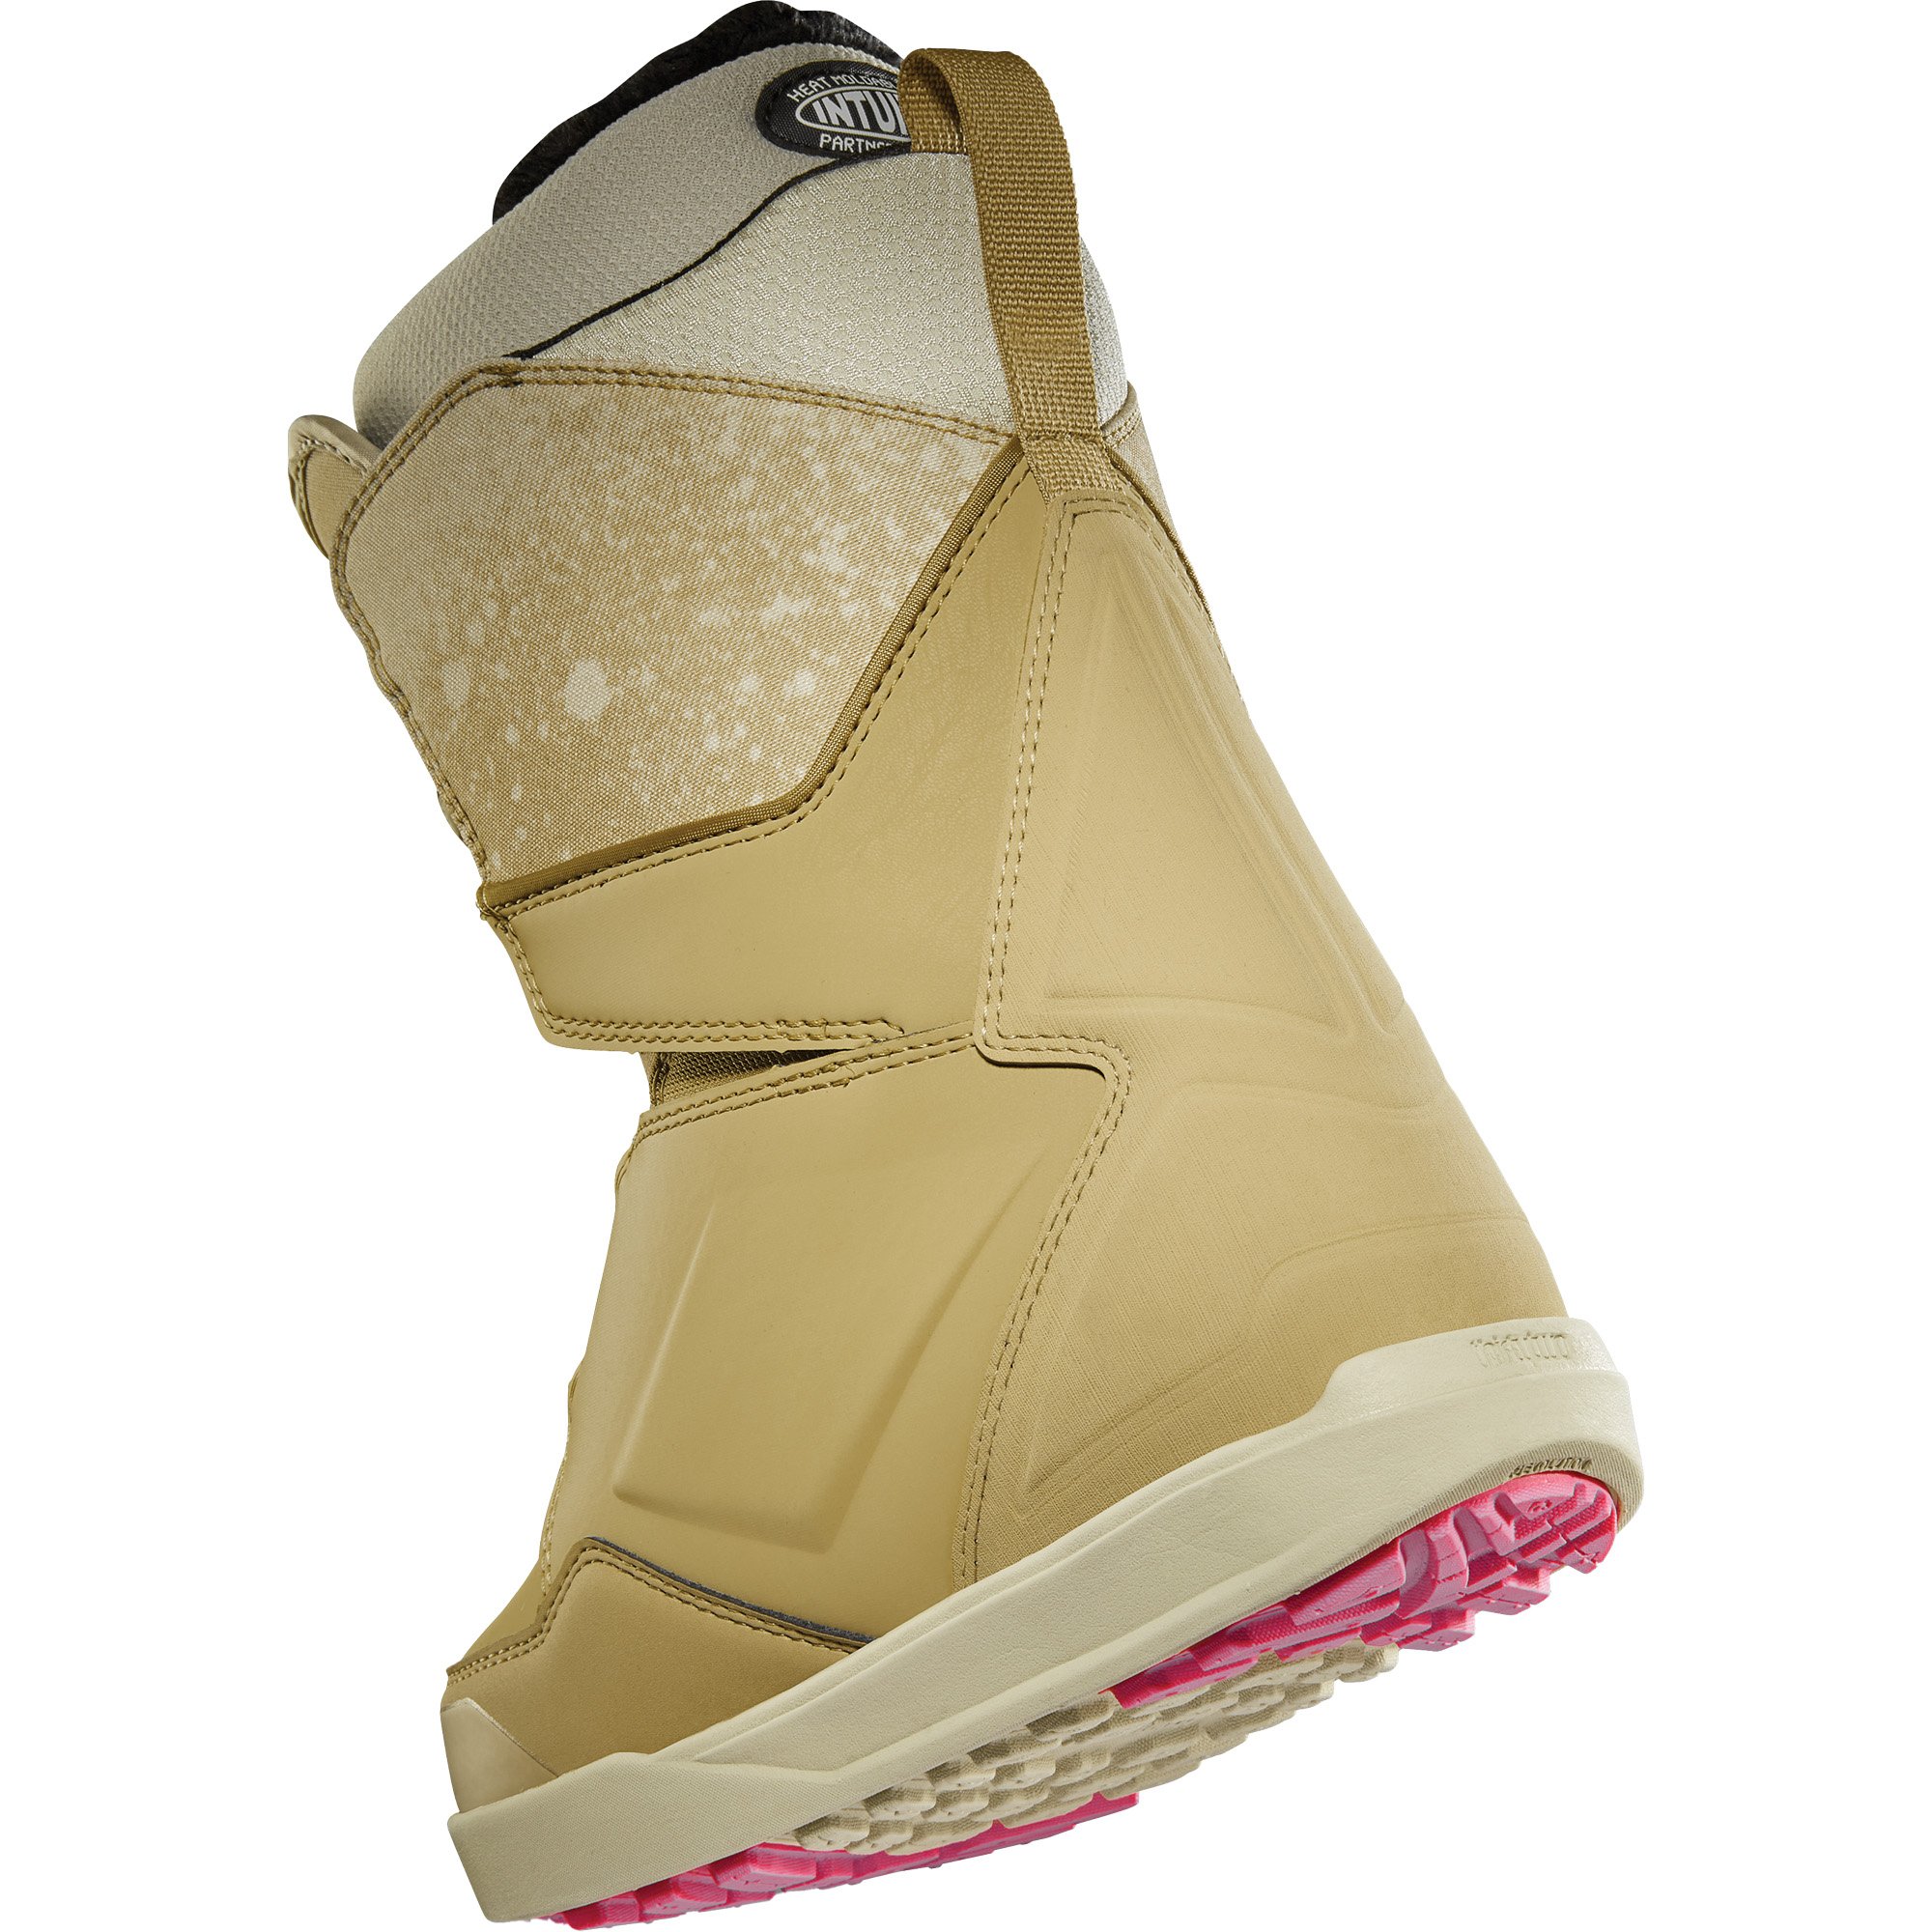 thirtytwo Lashed Double BOA B4BC Women's Snowboard Boots